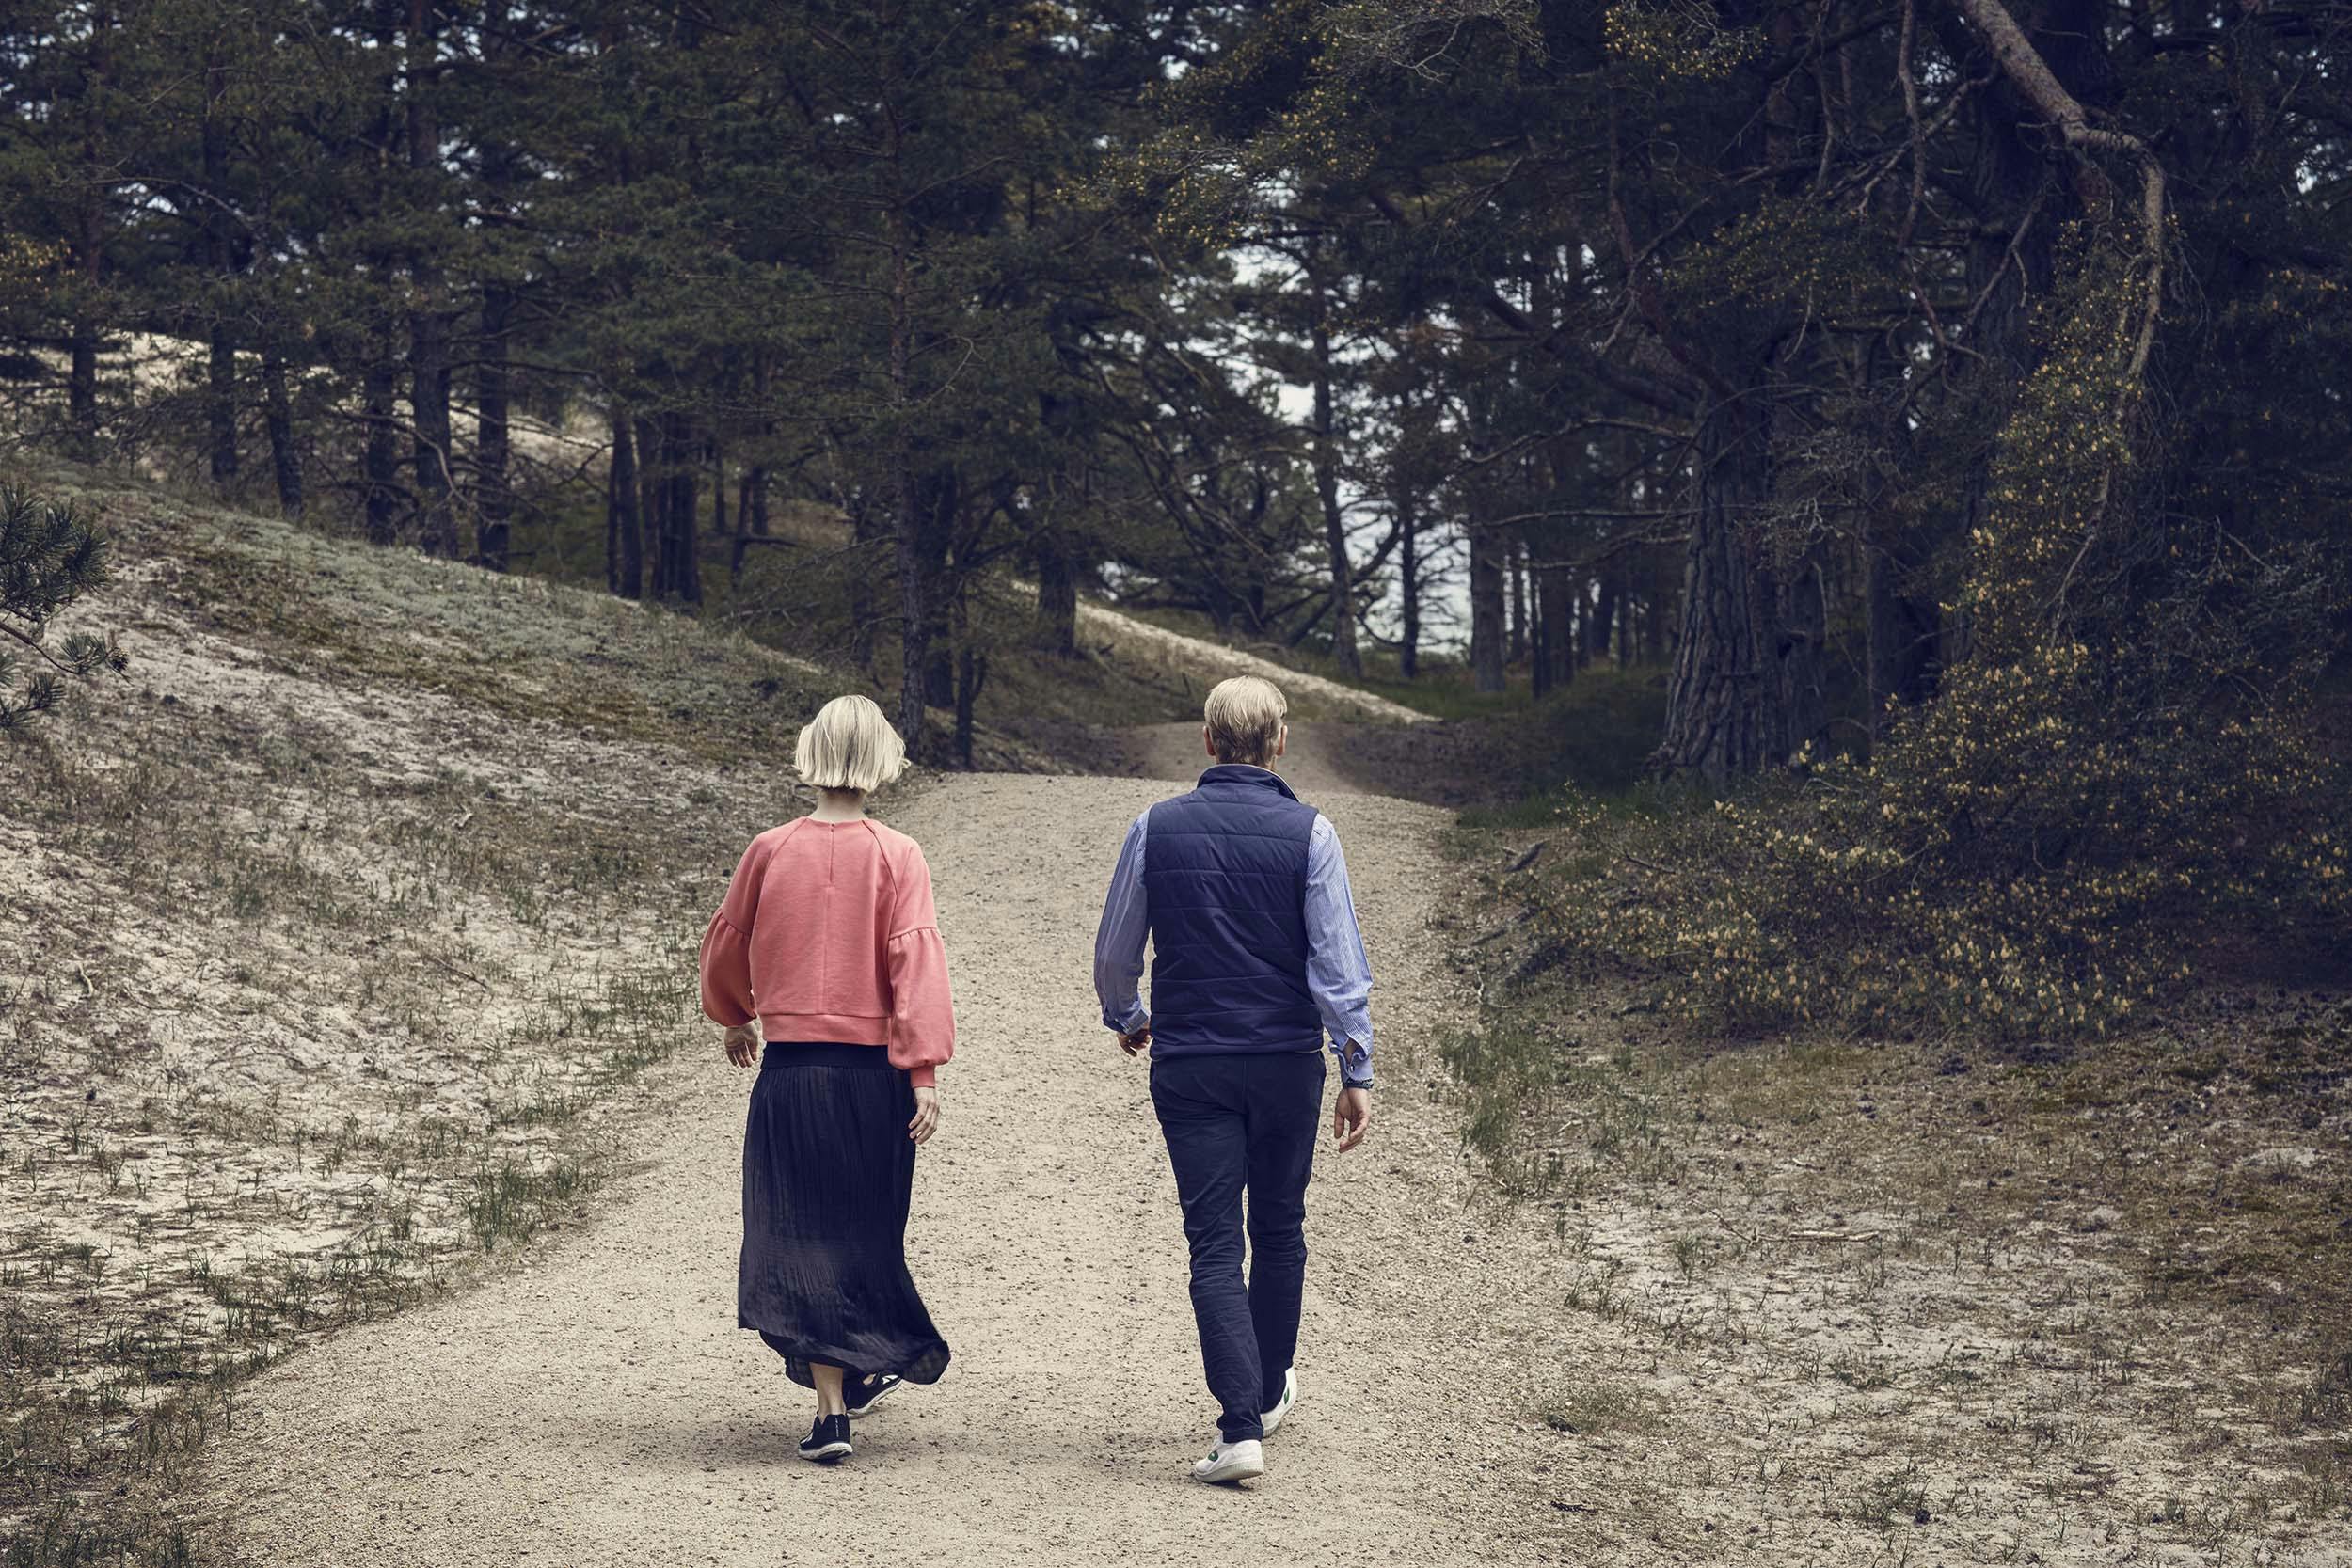 An elderly couple walking into a forest on a path